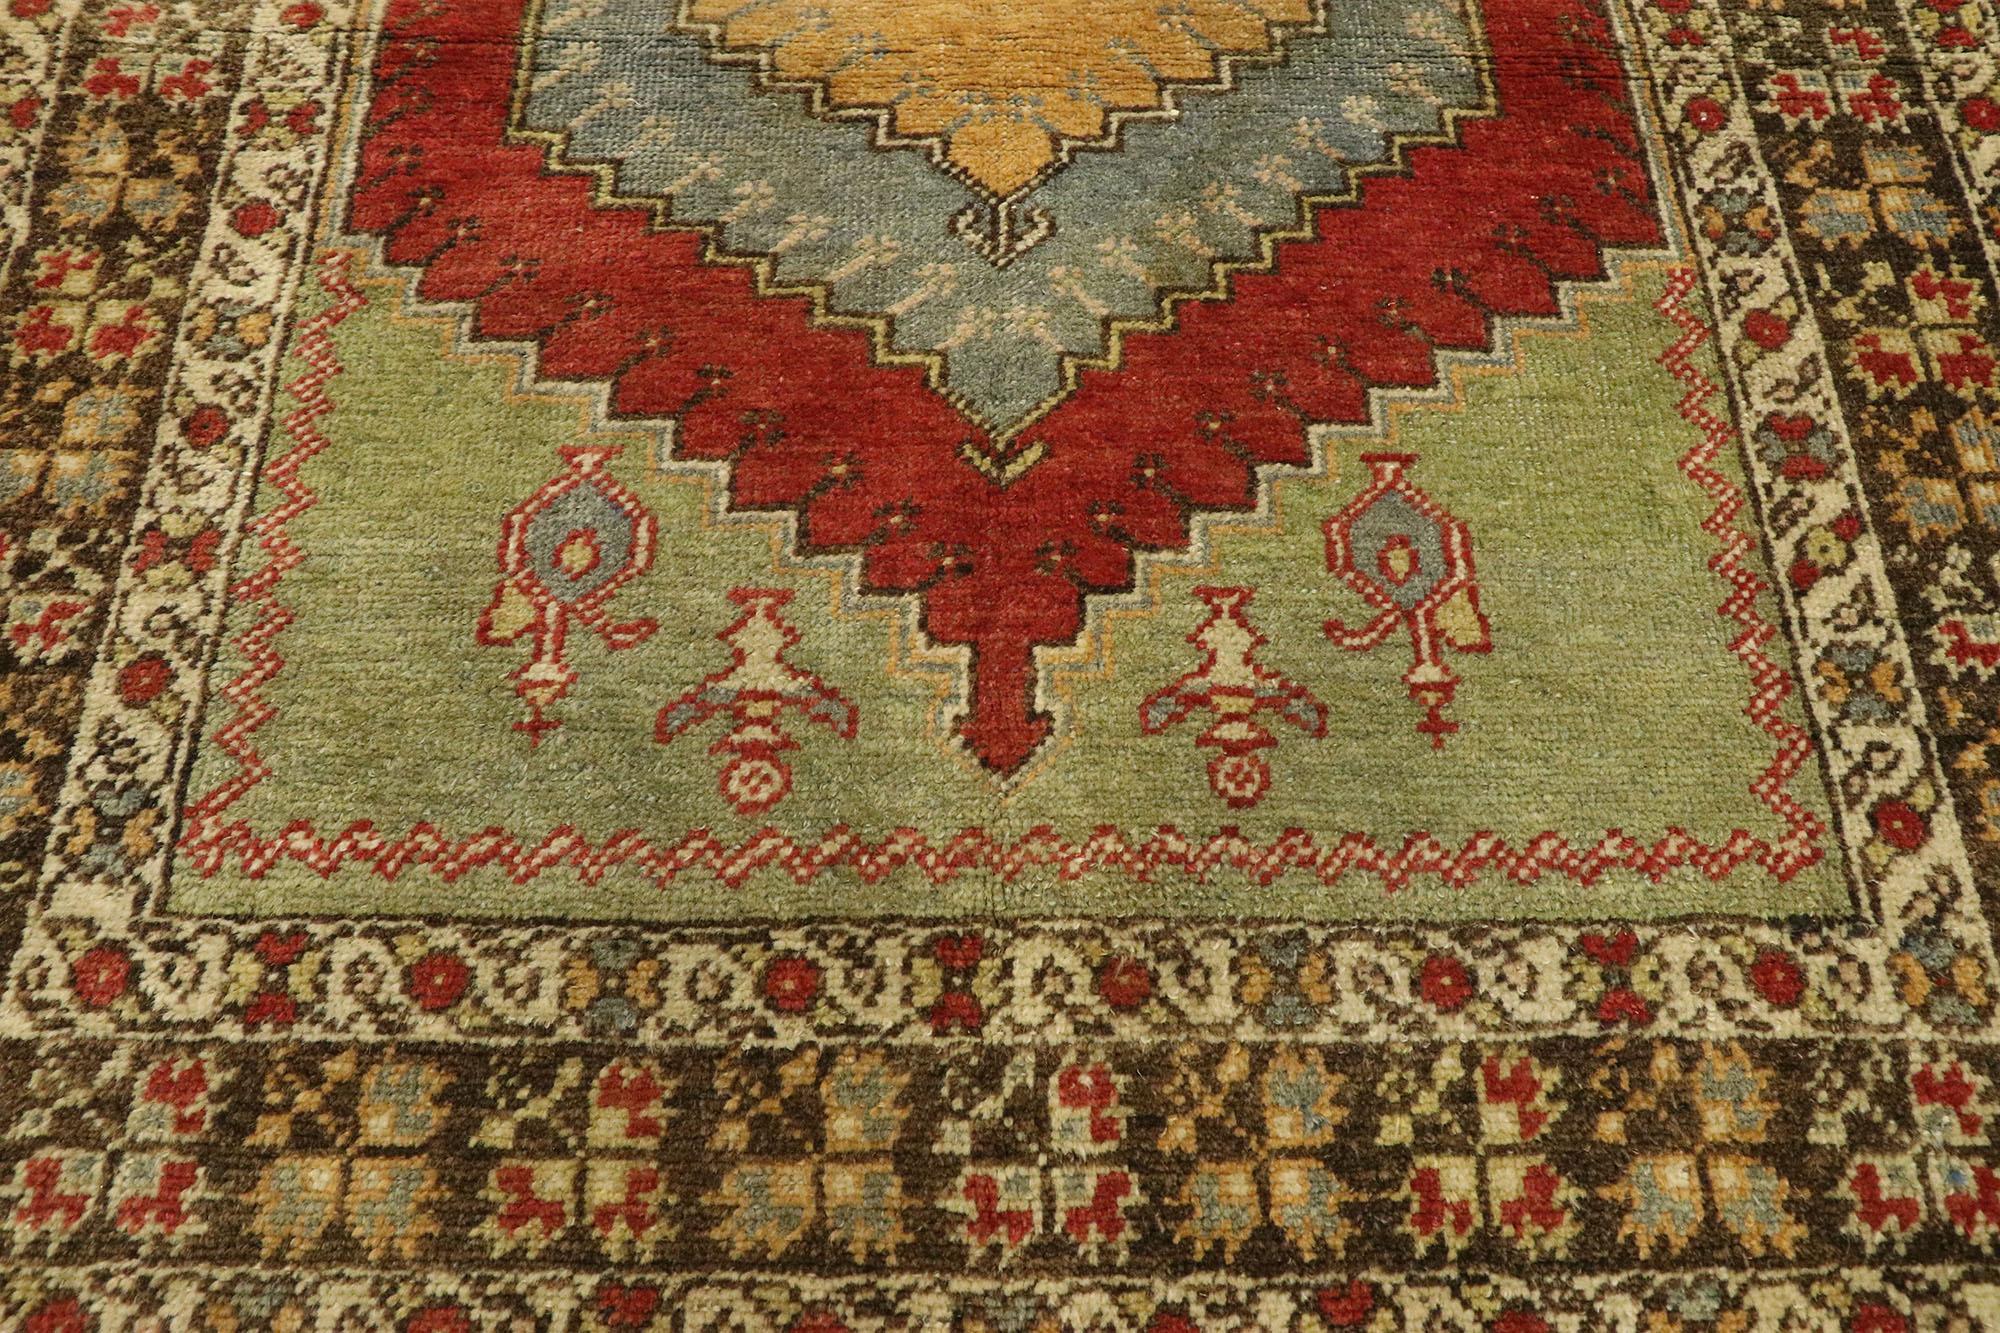 Vintage Turkish Oushak Prayer Rug with Craftsman Style In Good Condition For Sale In Dallas, TX